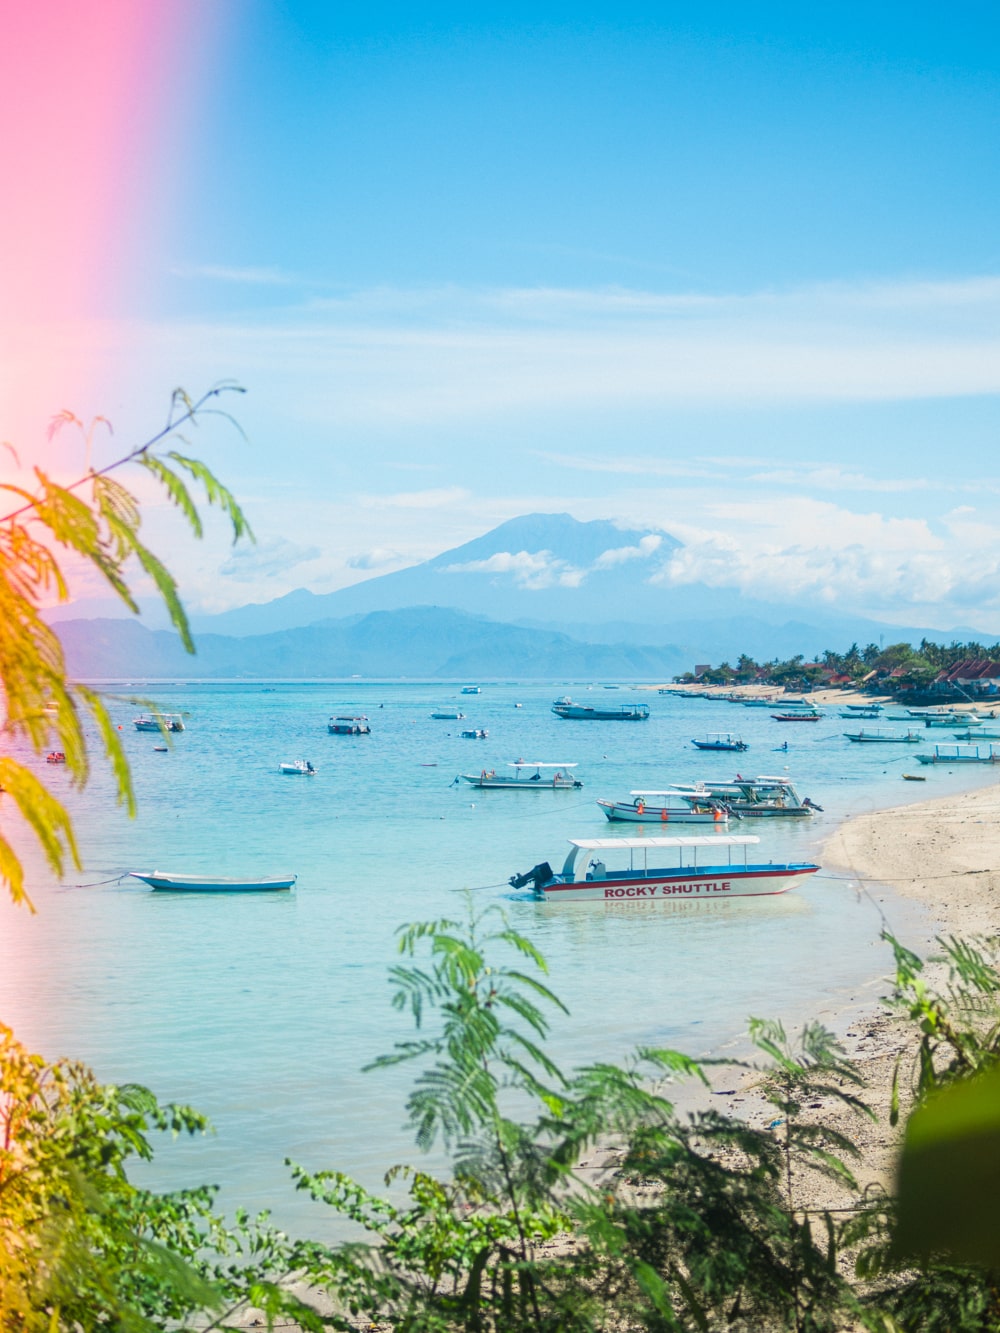 View of traditional boats at Jungut Batu Beach on Nusa Lembongan, with Bali's Mount Agung in the background.